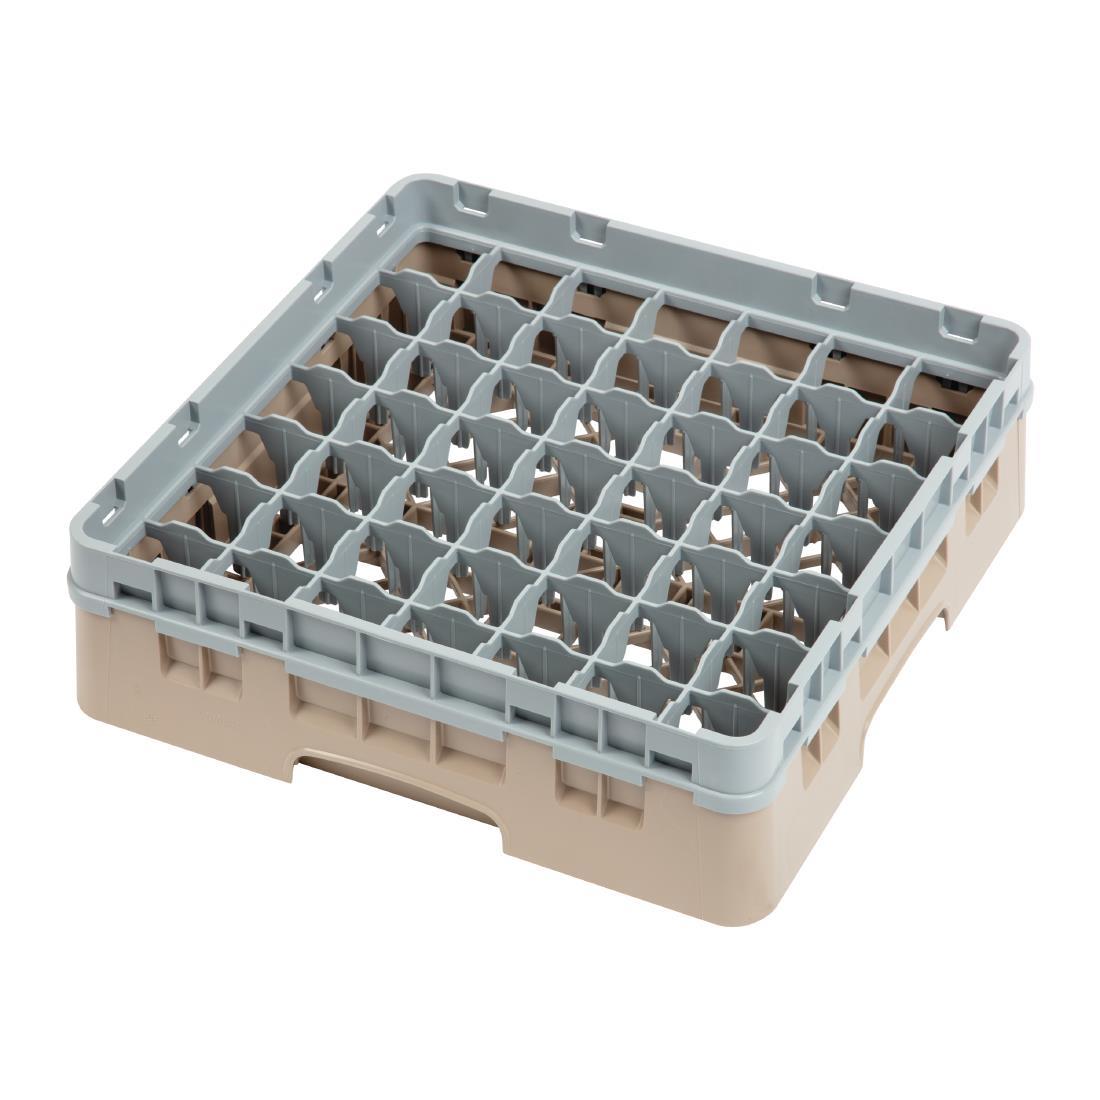 Cambro Camrack Beige 49 Compartments Max Glass Height 92mm - DW561  - 1